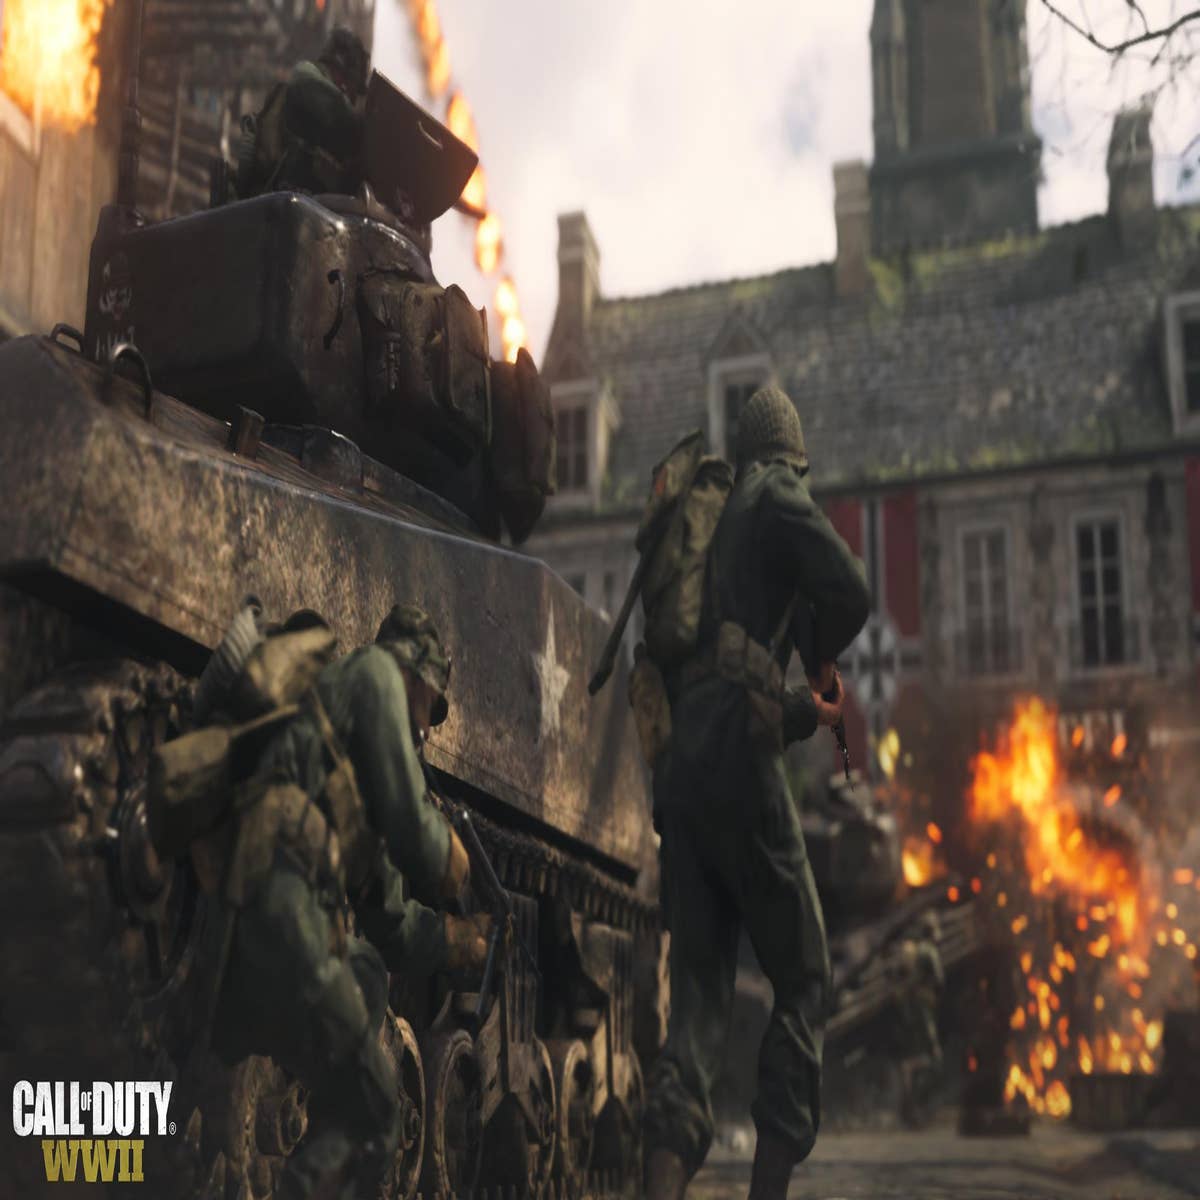 Call of Duty: WW2 Multiplayer Free on Steam This Weekend